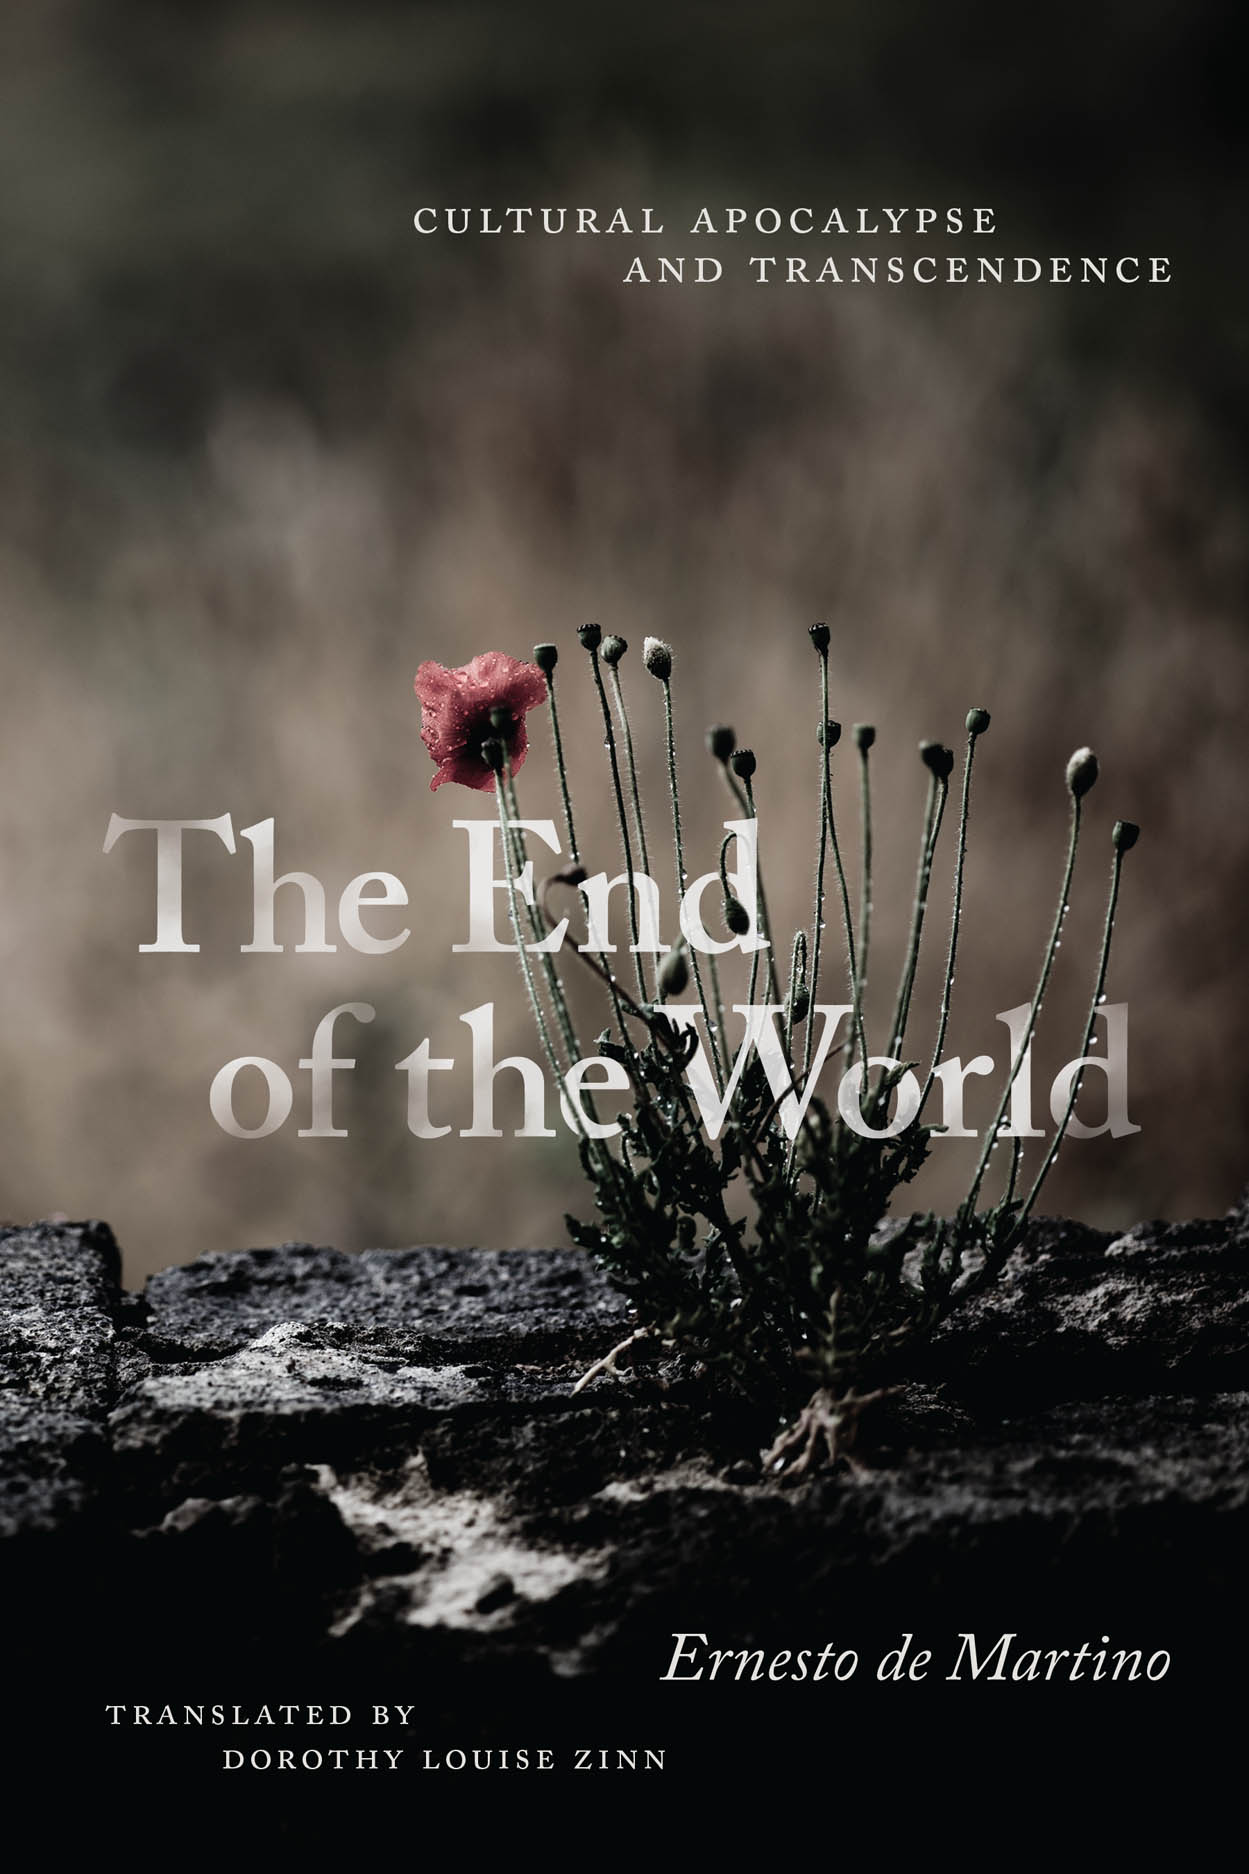 this is the end cover